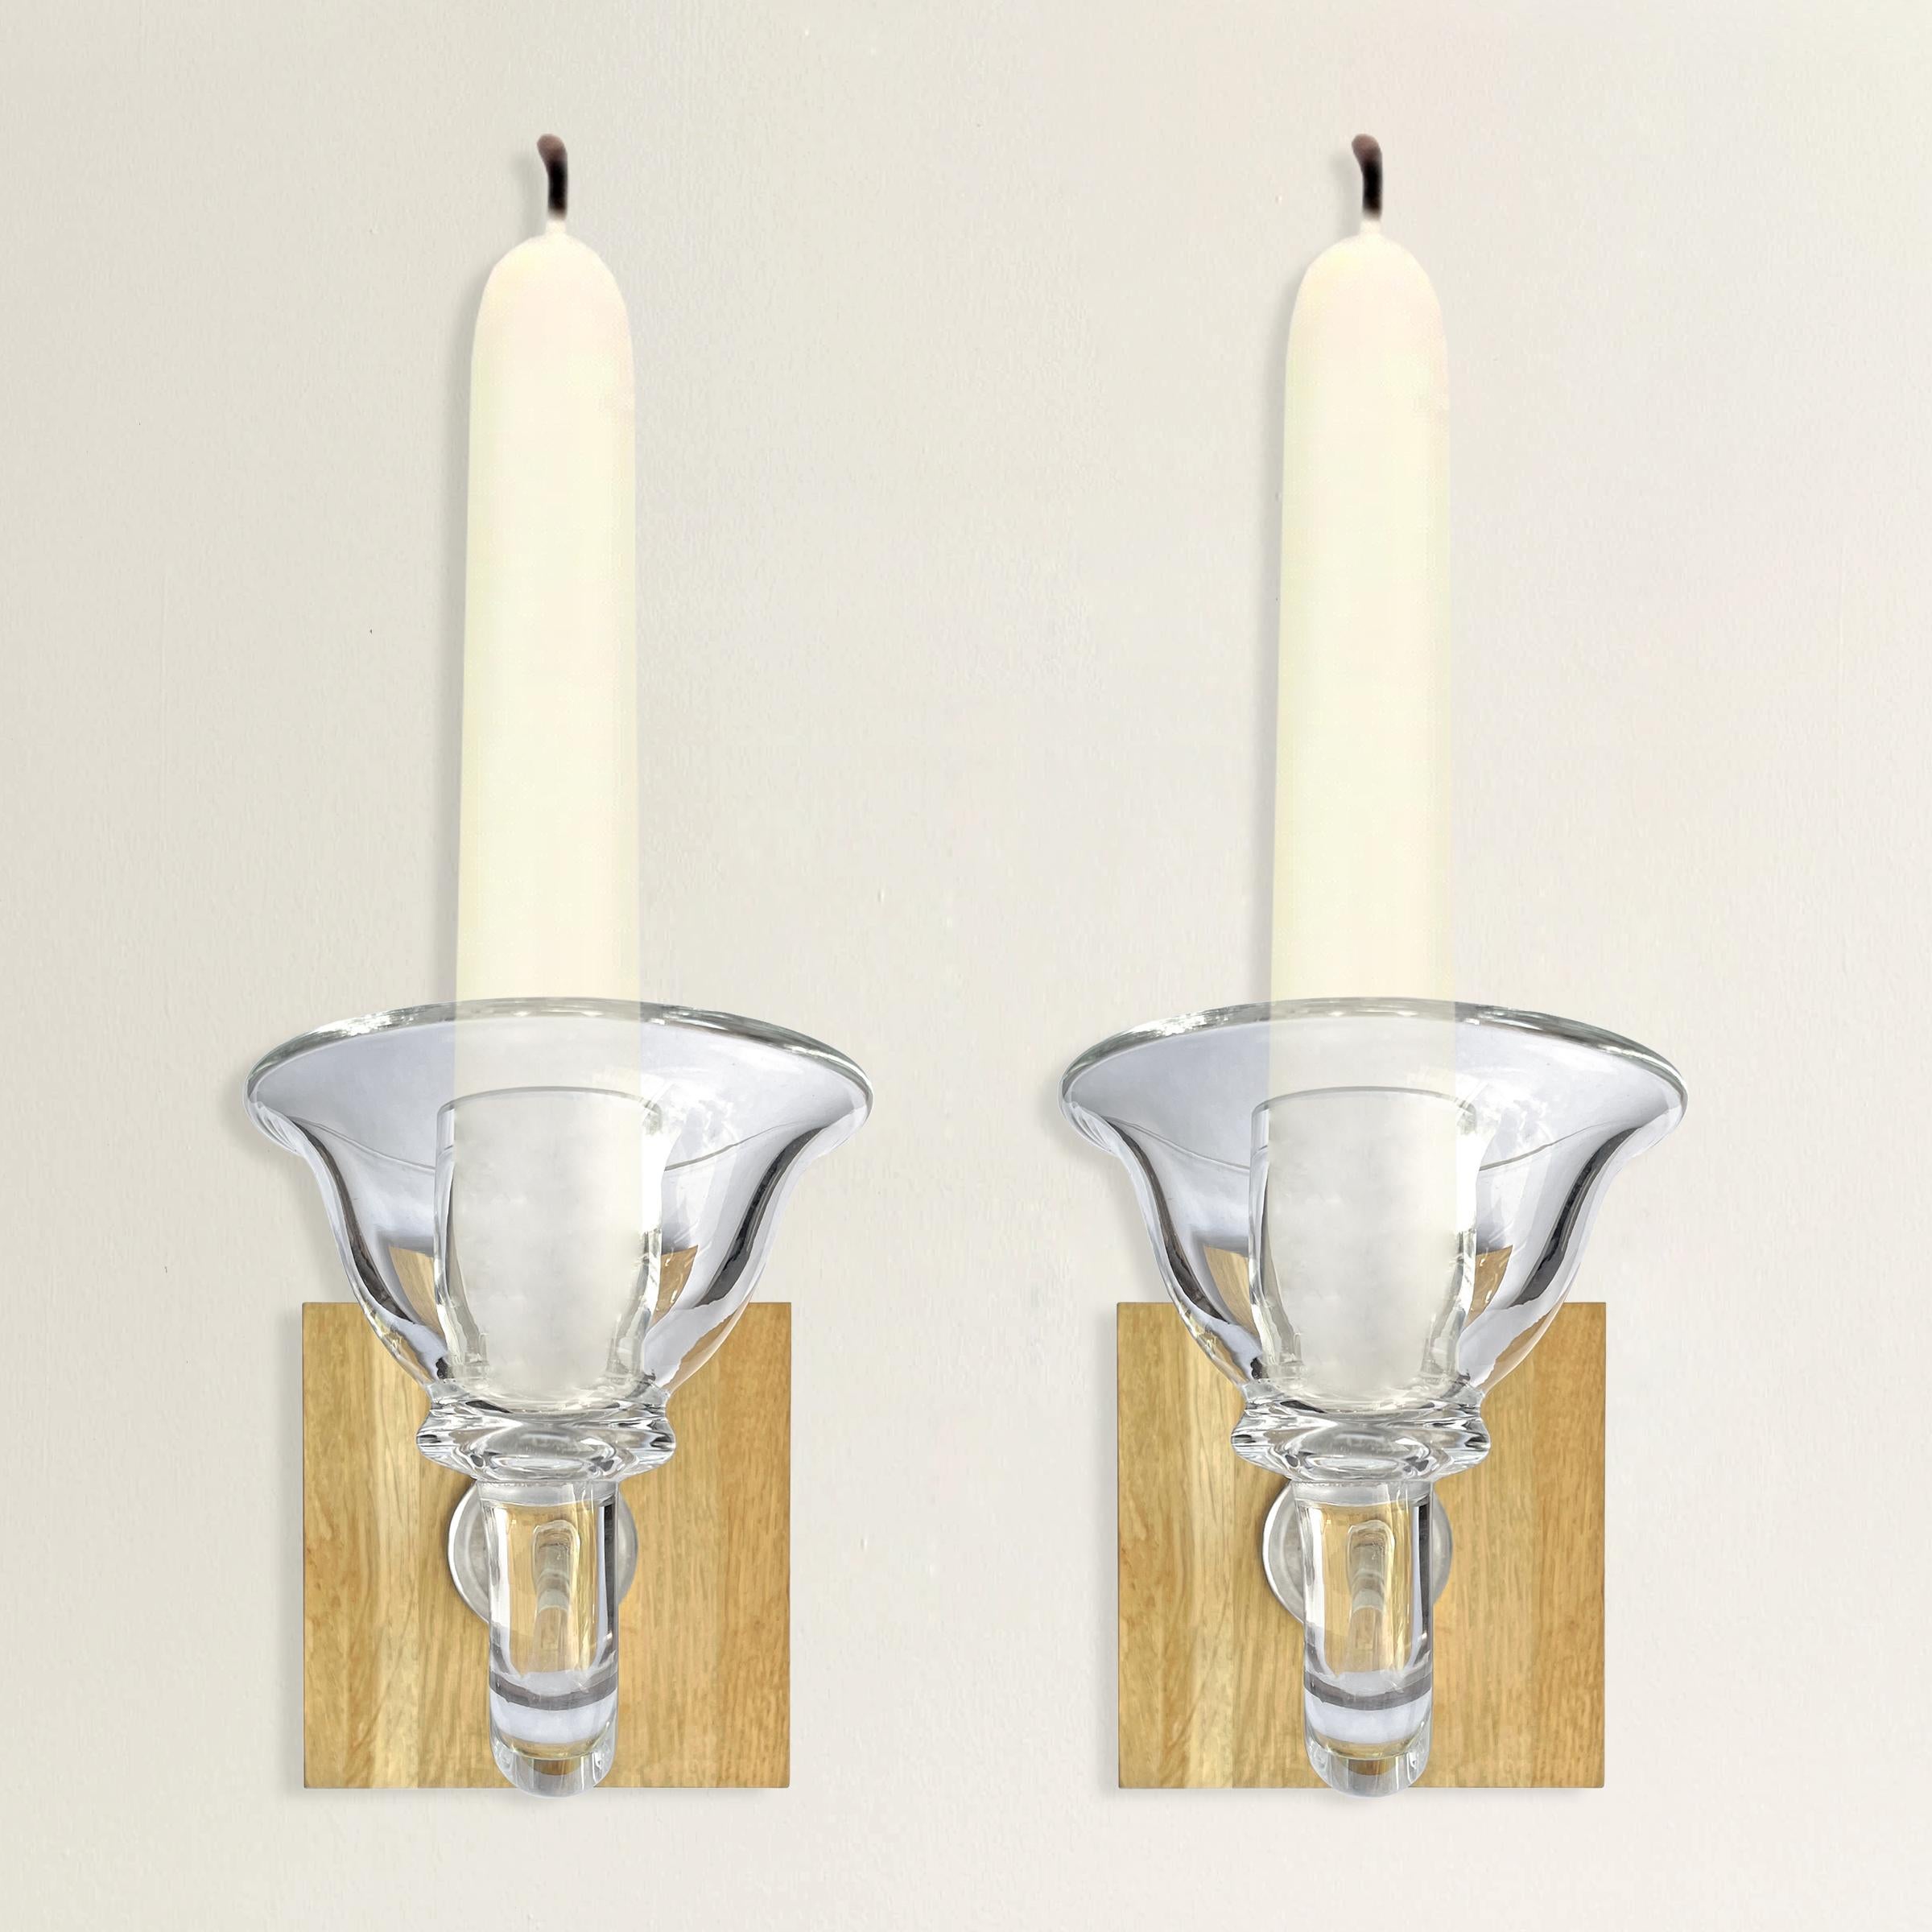 A chic pair of Belgian handblown glass candle sconces with wide bobeches, curved arms, and mounted to a modern oak wall mounts. Etched 'Cleybergh' on each arm. Intended for use with tapers.